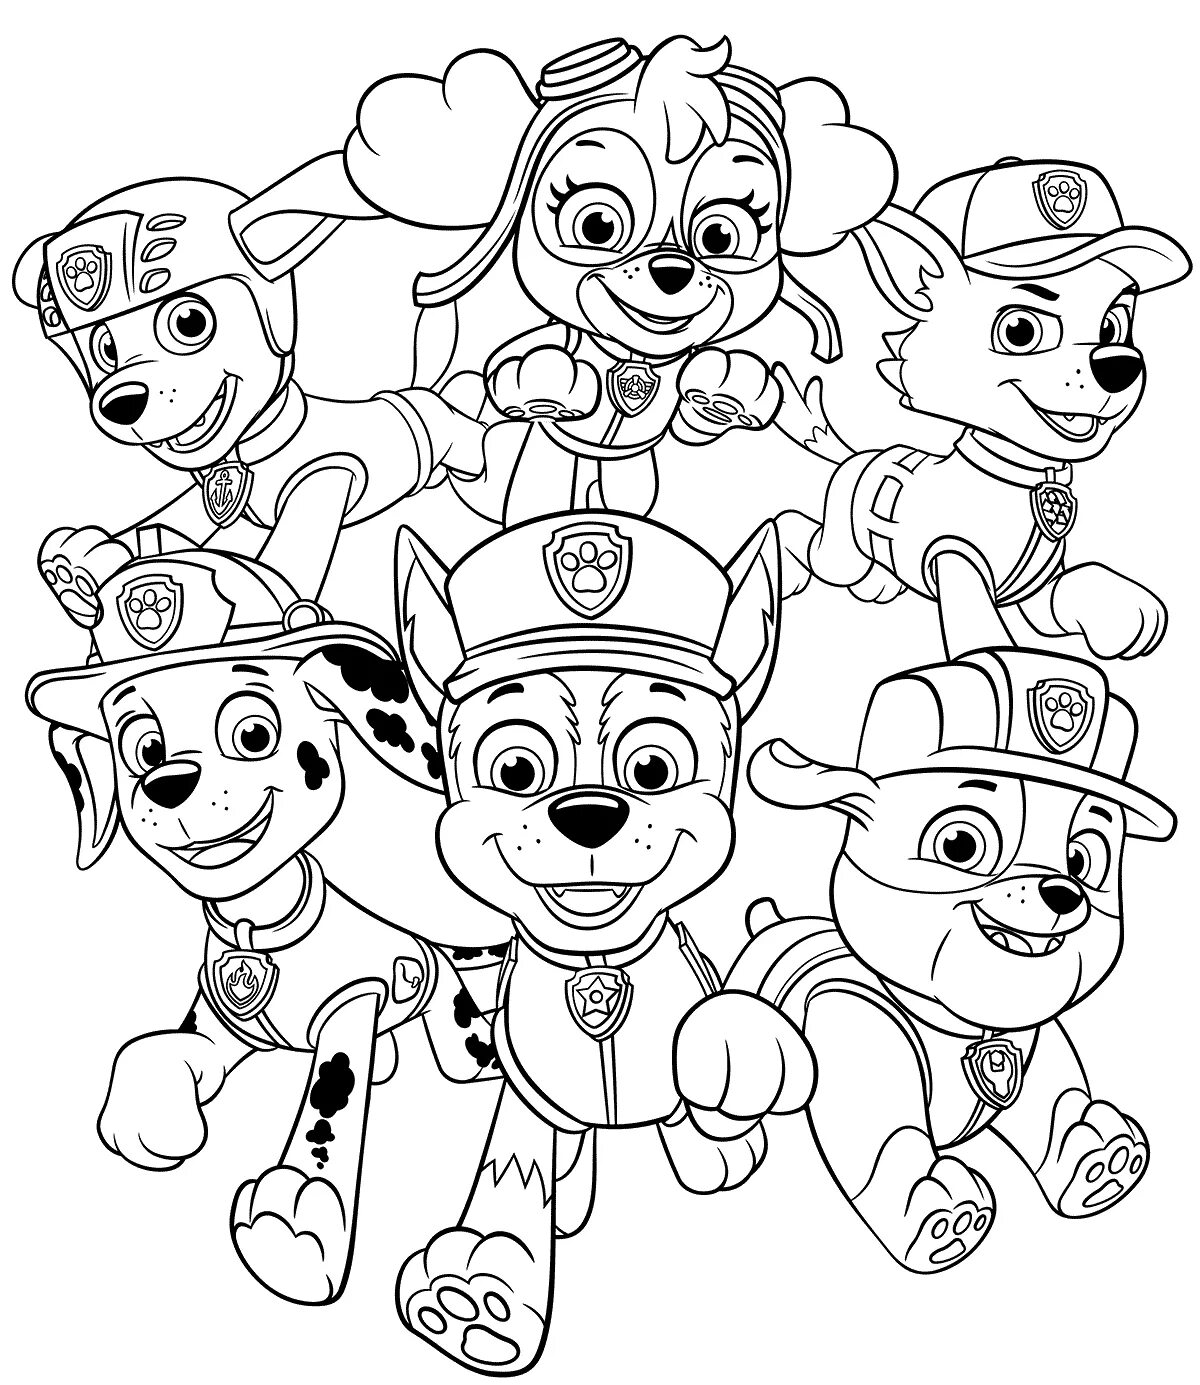 Paw Patrol quirky coloring book